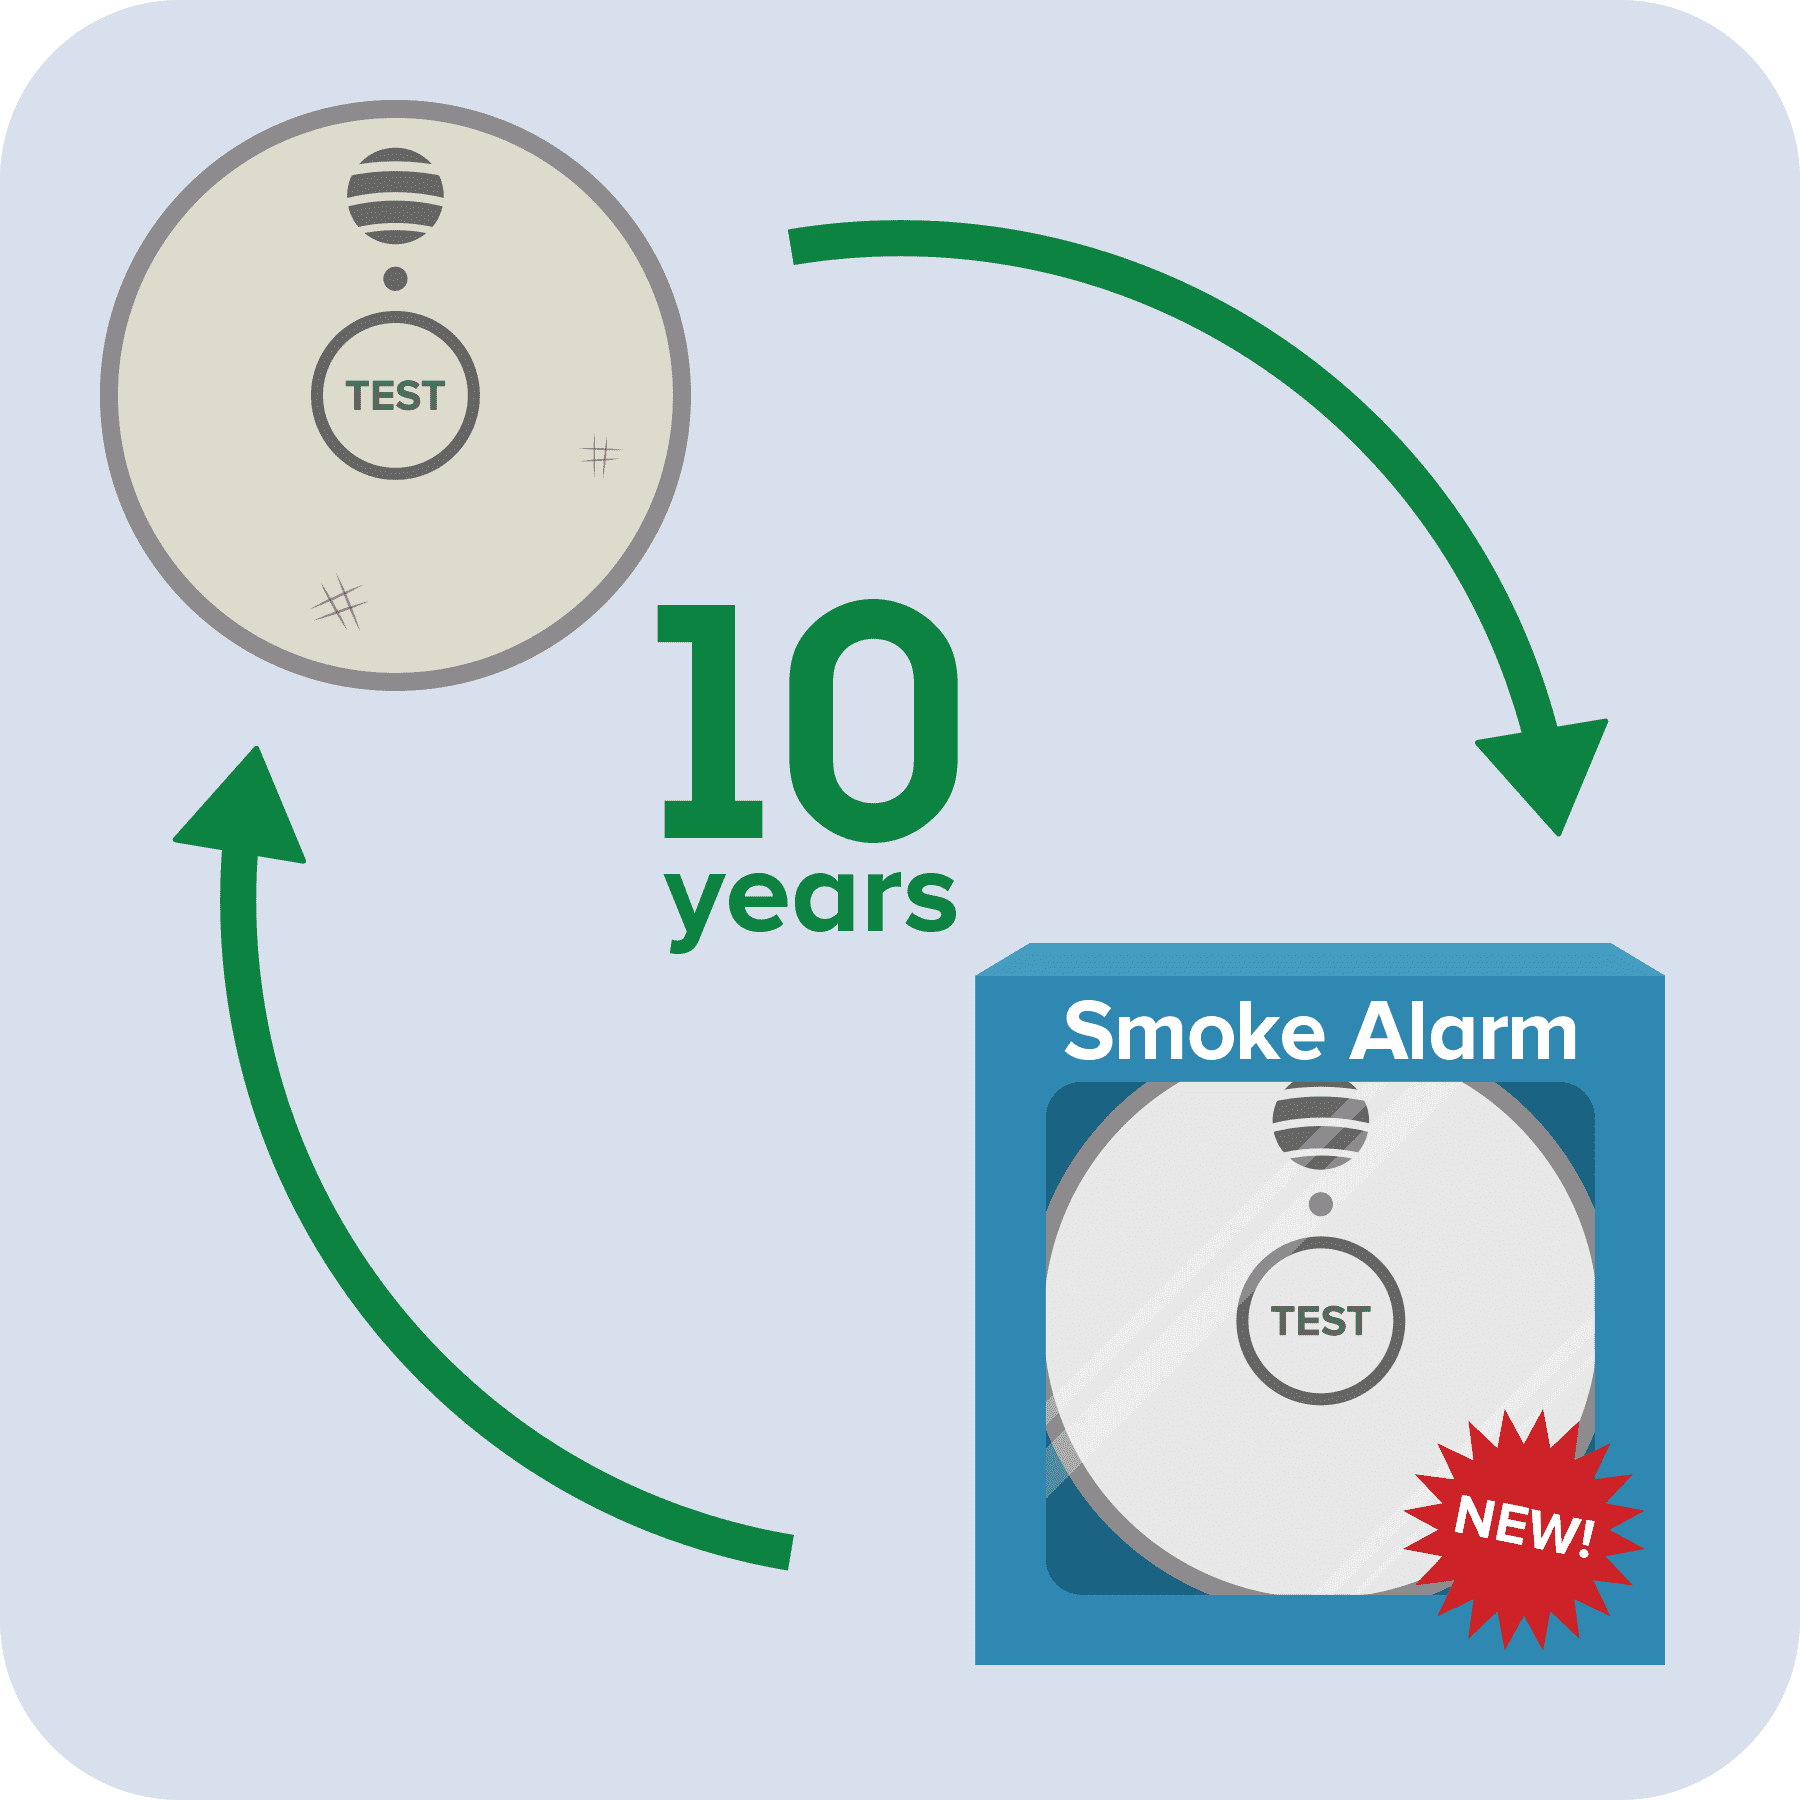 New alarm with green 10 year prompt and circular arrows to indicate swapping the alarms.